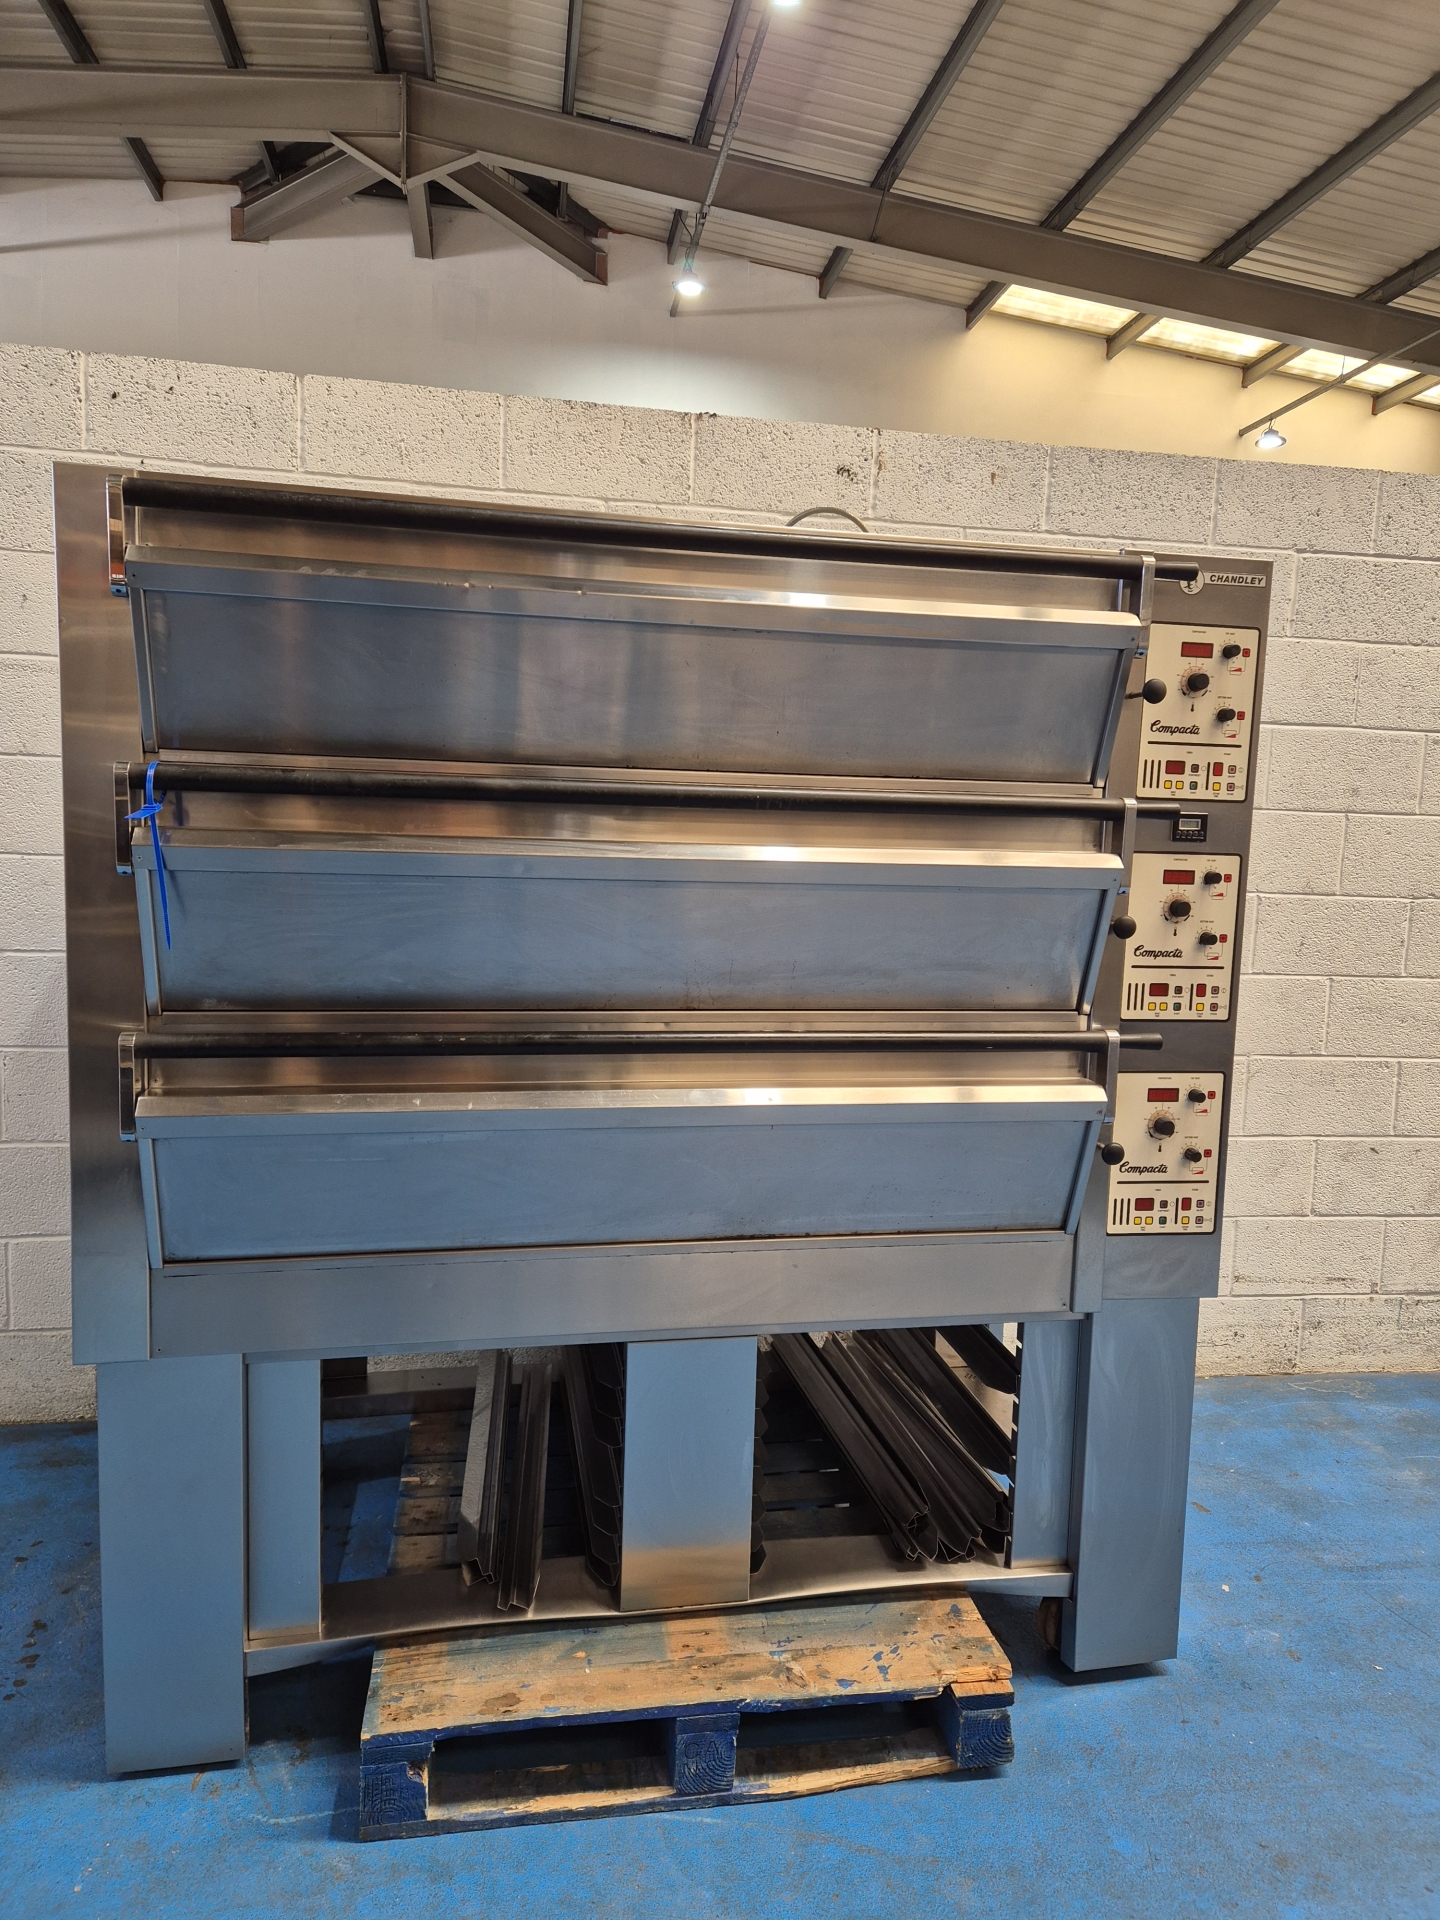 Tom Chandley 9 Tray (18" x 30" Trays) Deck Oven